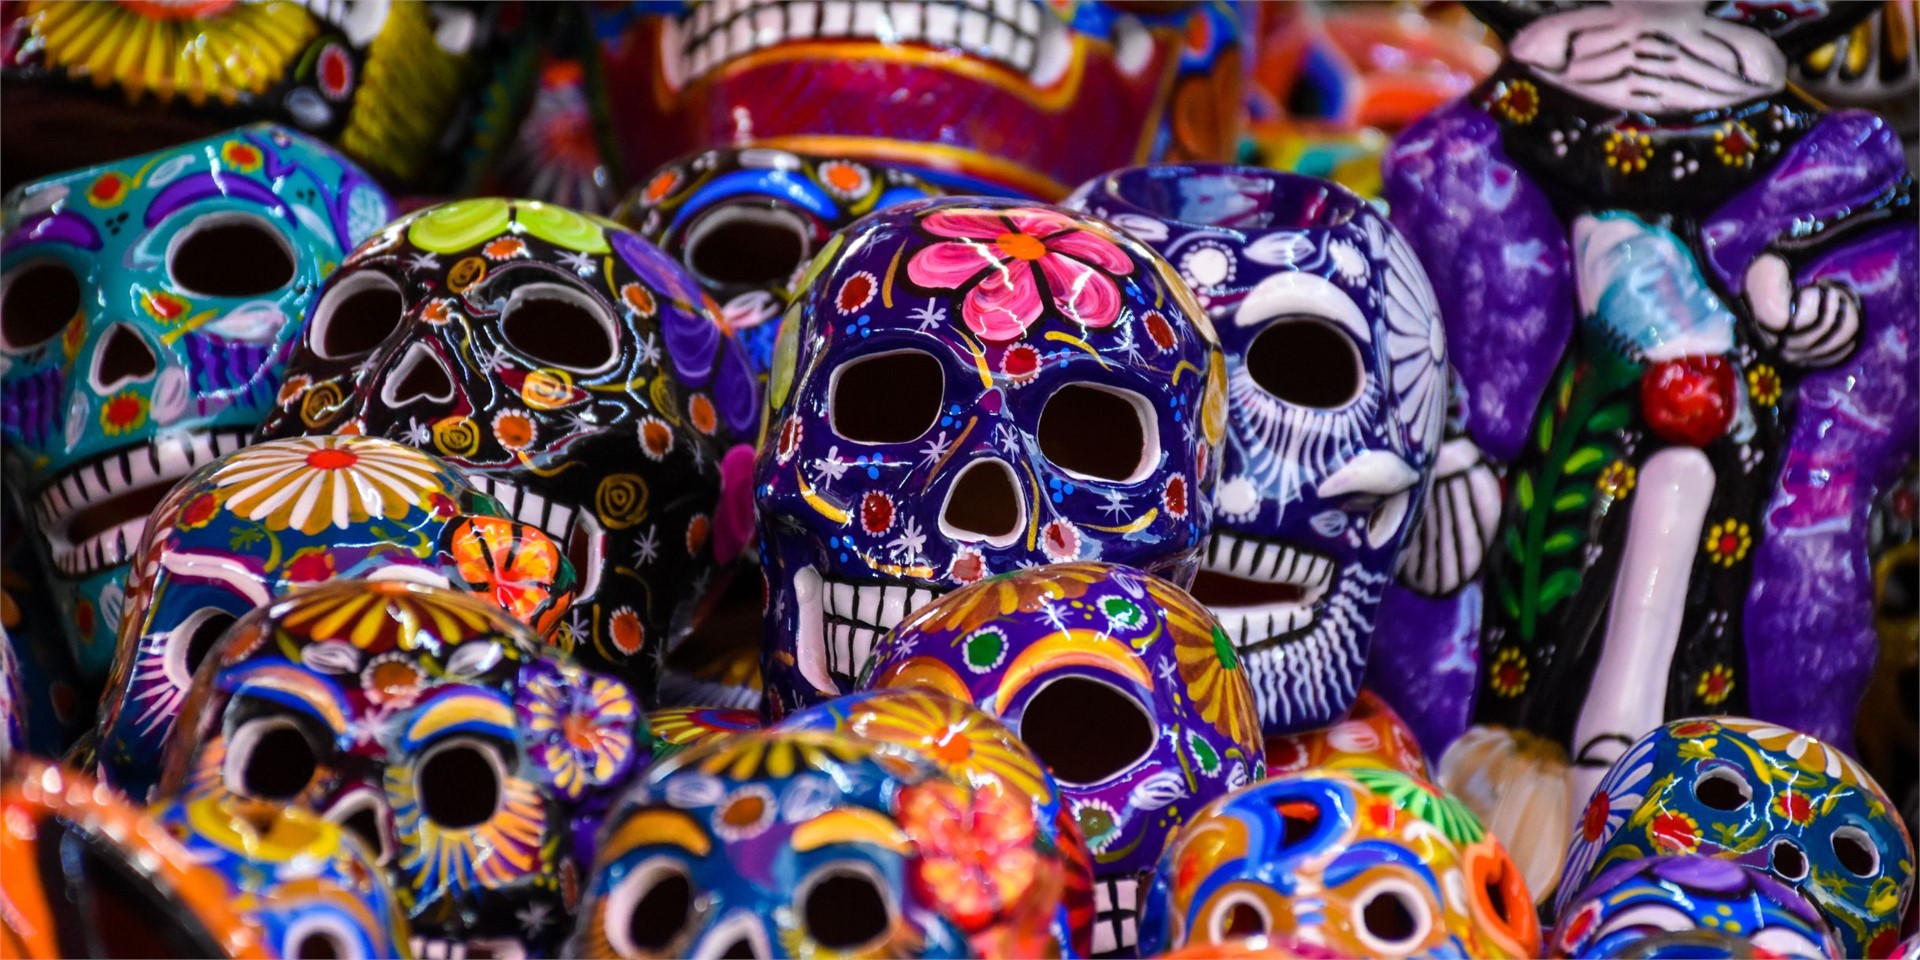 Book your trip to the Day of the Dead in Mexico City
